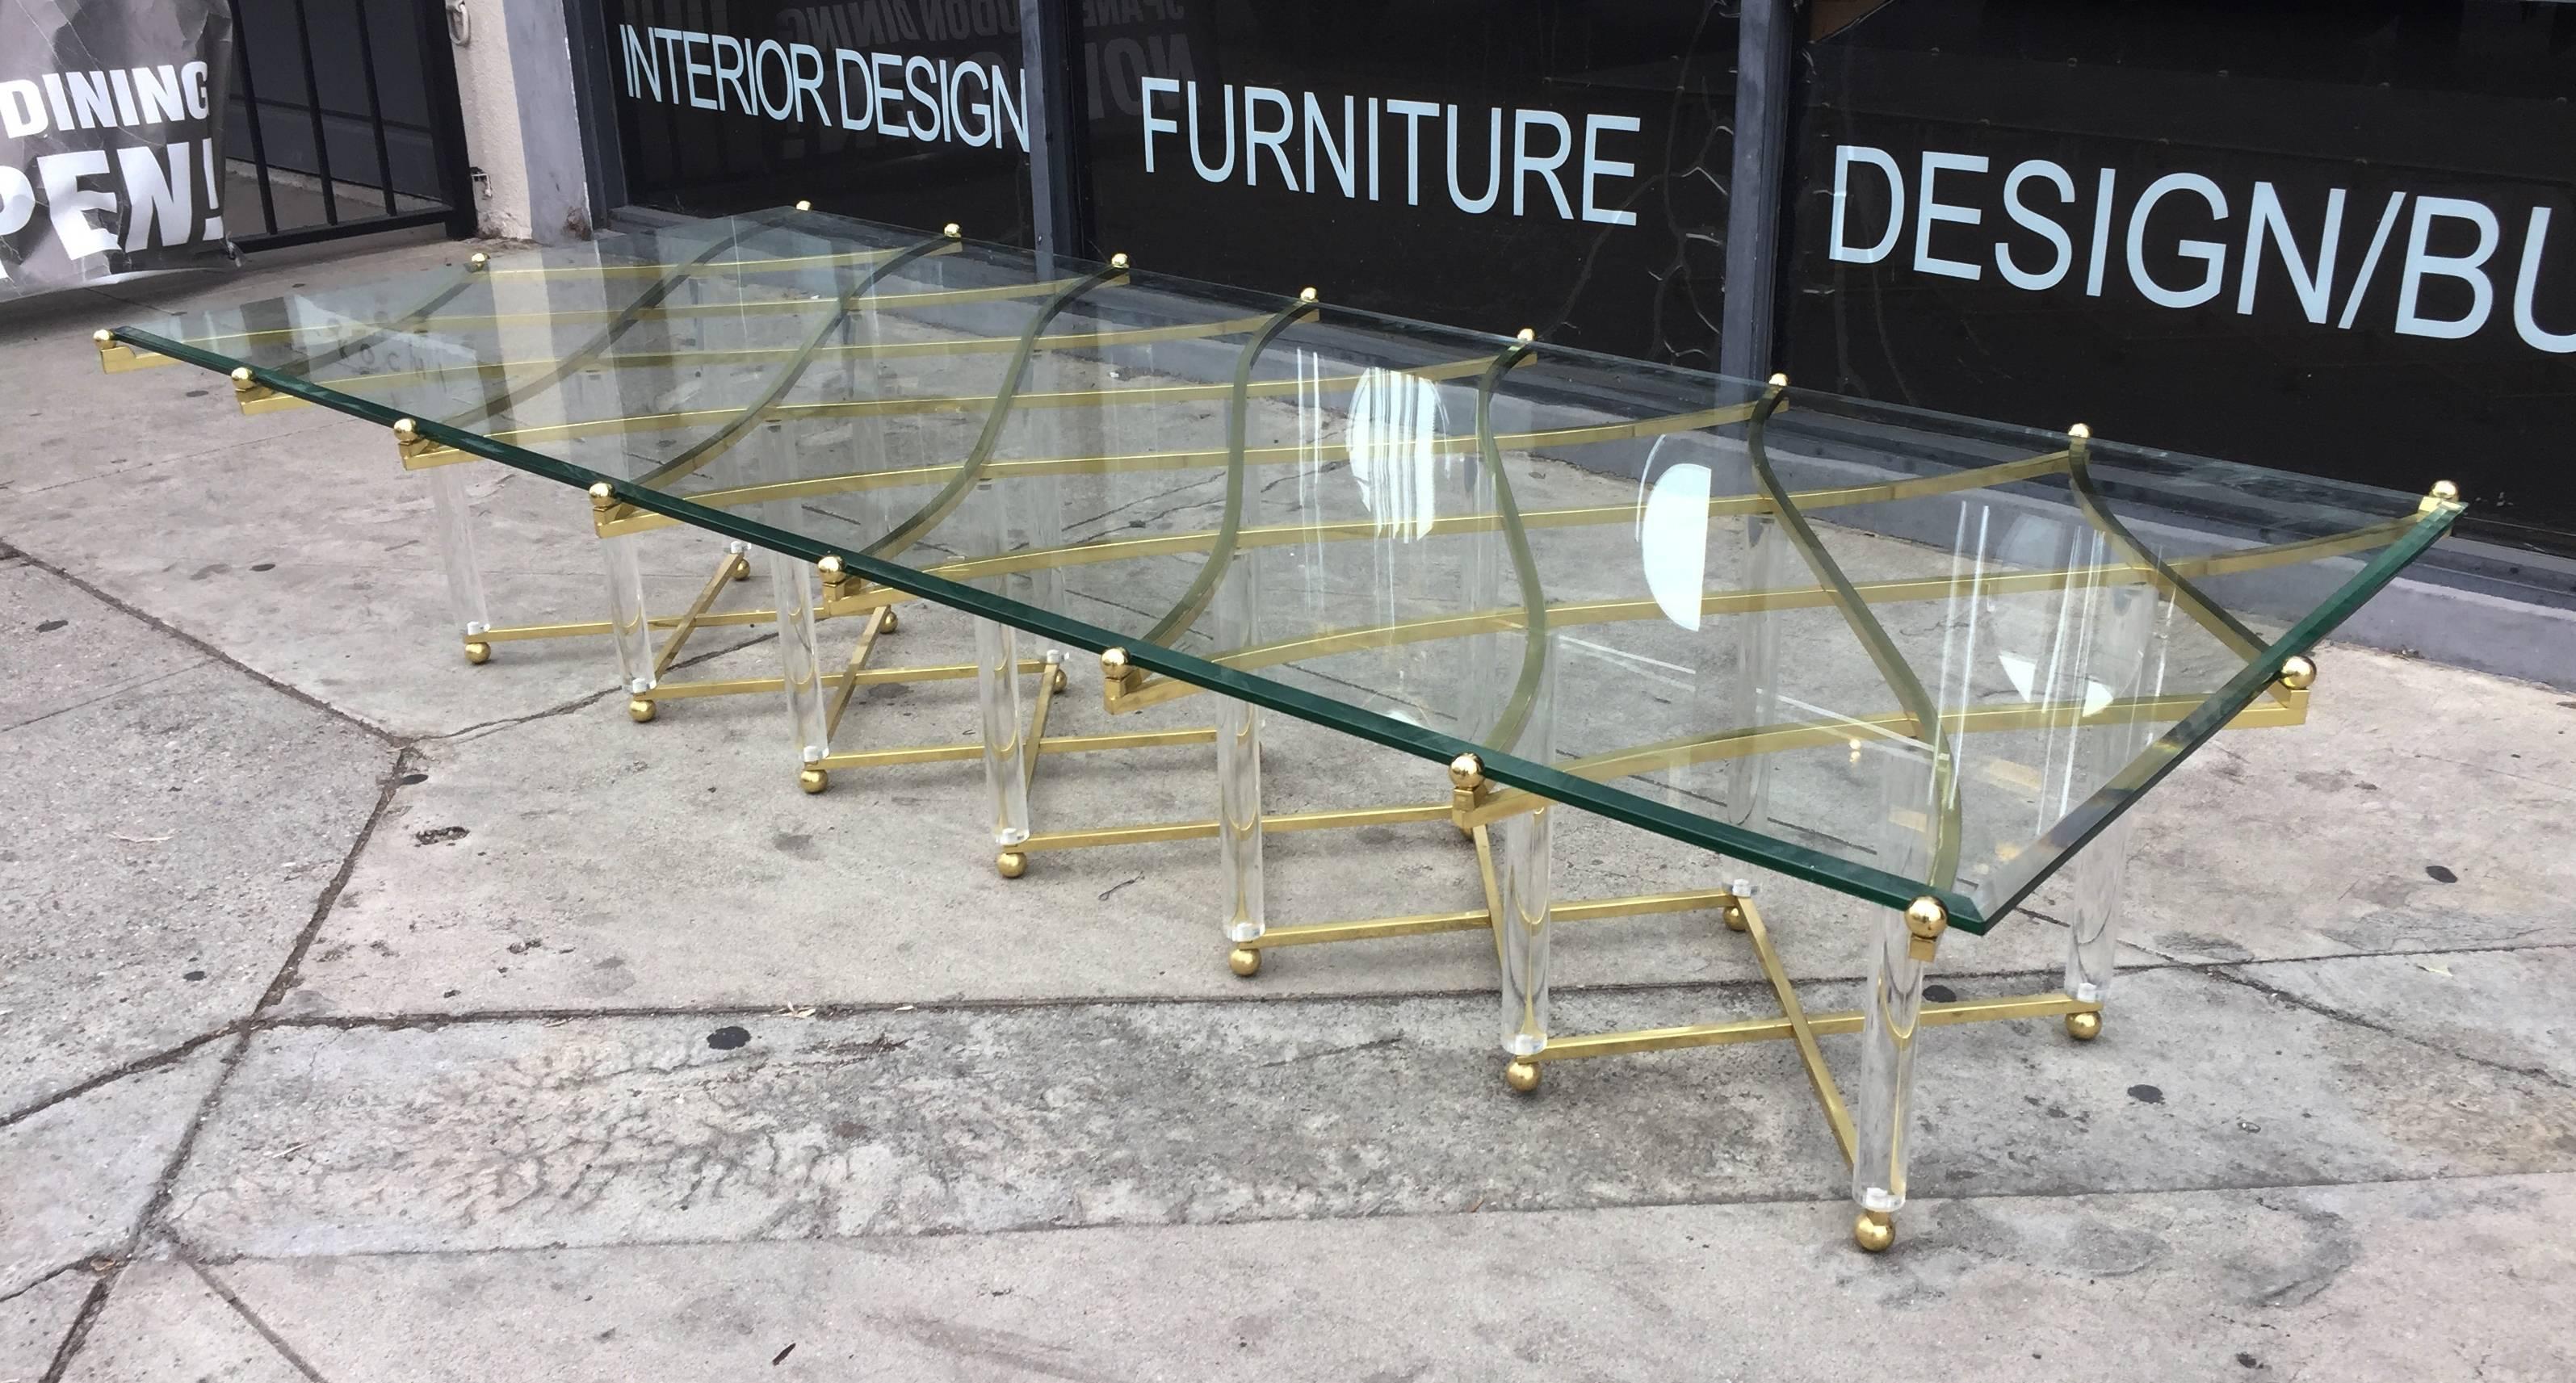 This amazing brass and Lucite coffee table by Hollis Jones is quite possibly his most exquisite design. 
Known for his innovation with the use of Lucite and metal, Hollis Jones is a master at combining elegance and wit. The brass lattice work of the